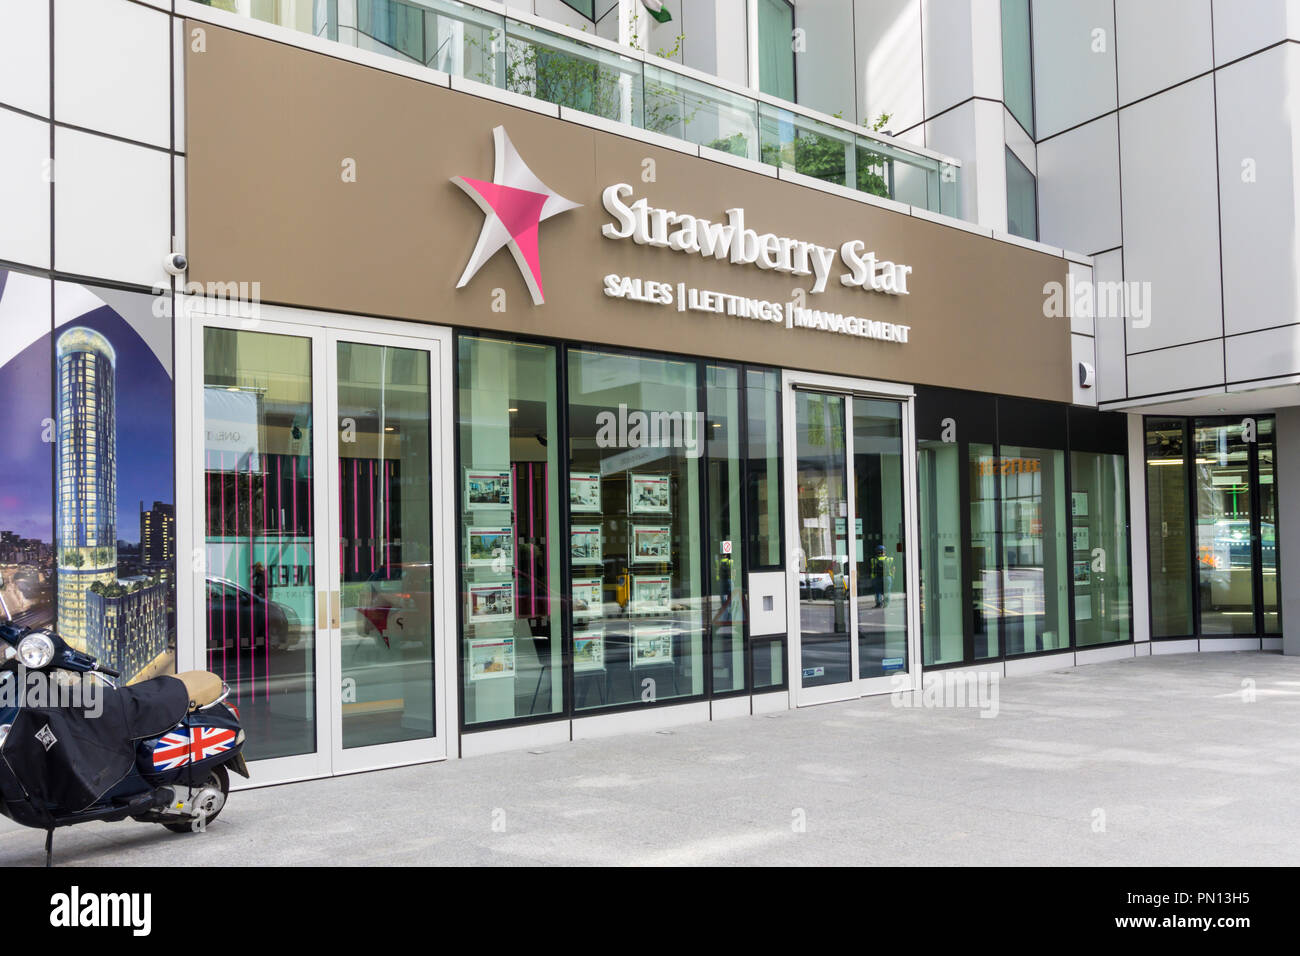 Sales, lettings & management offices of Strawberry Star property company at Vauxhall, London. Stock Photo